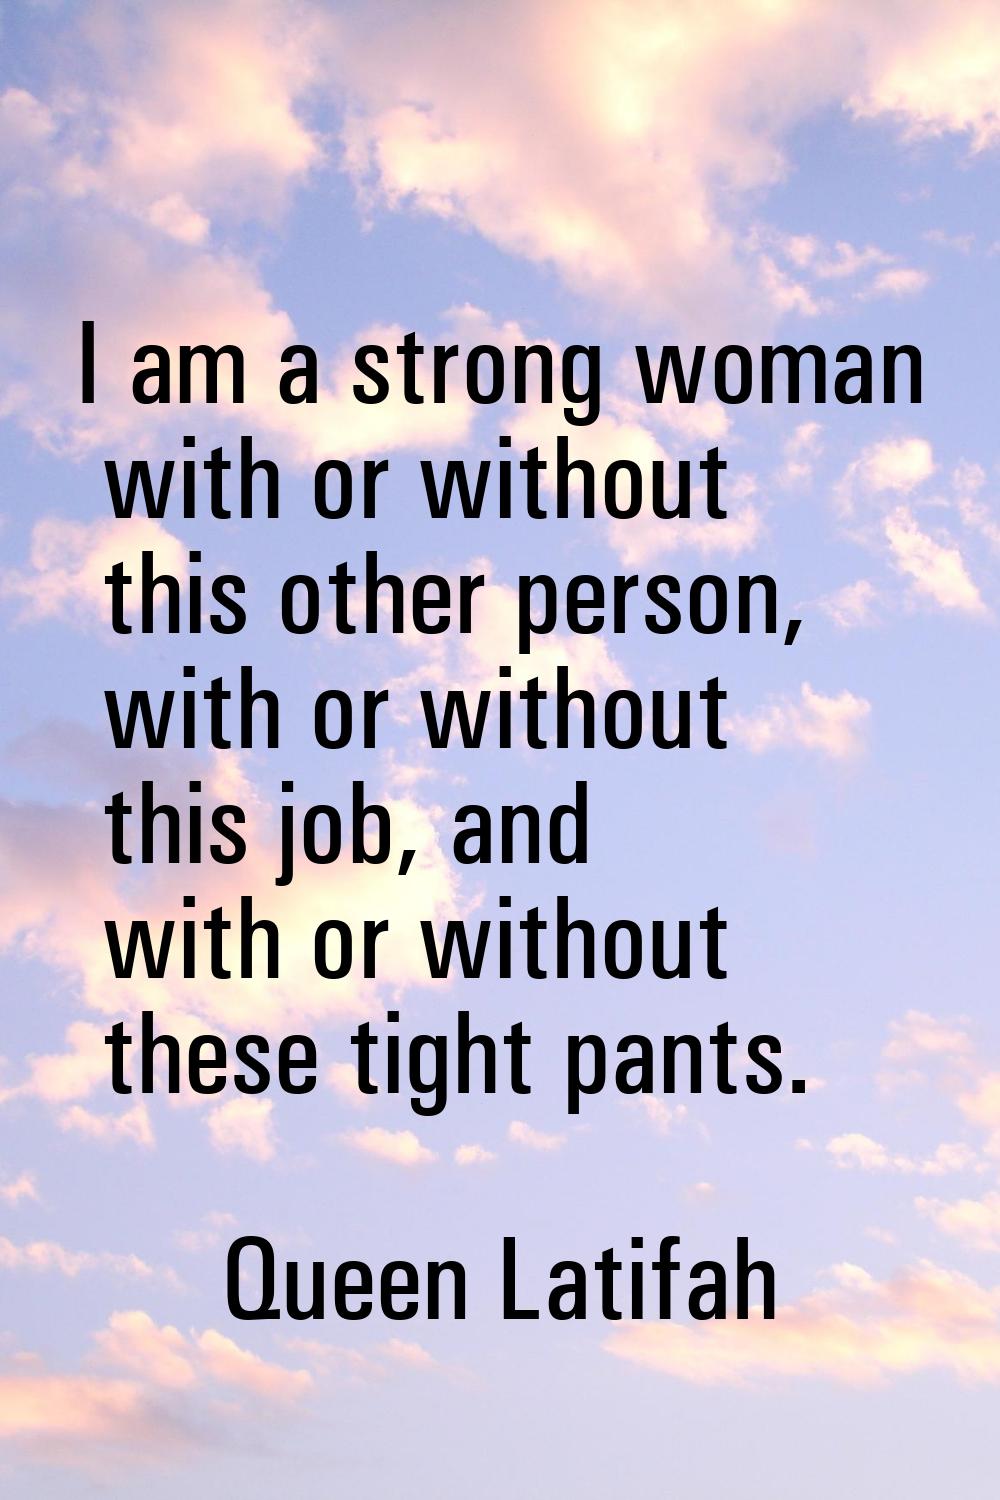 I am a strong woman with or without this other person, with or without this job, and with or withou